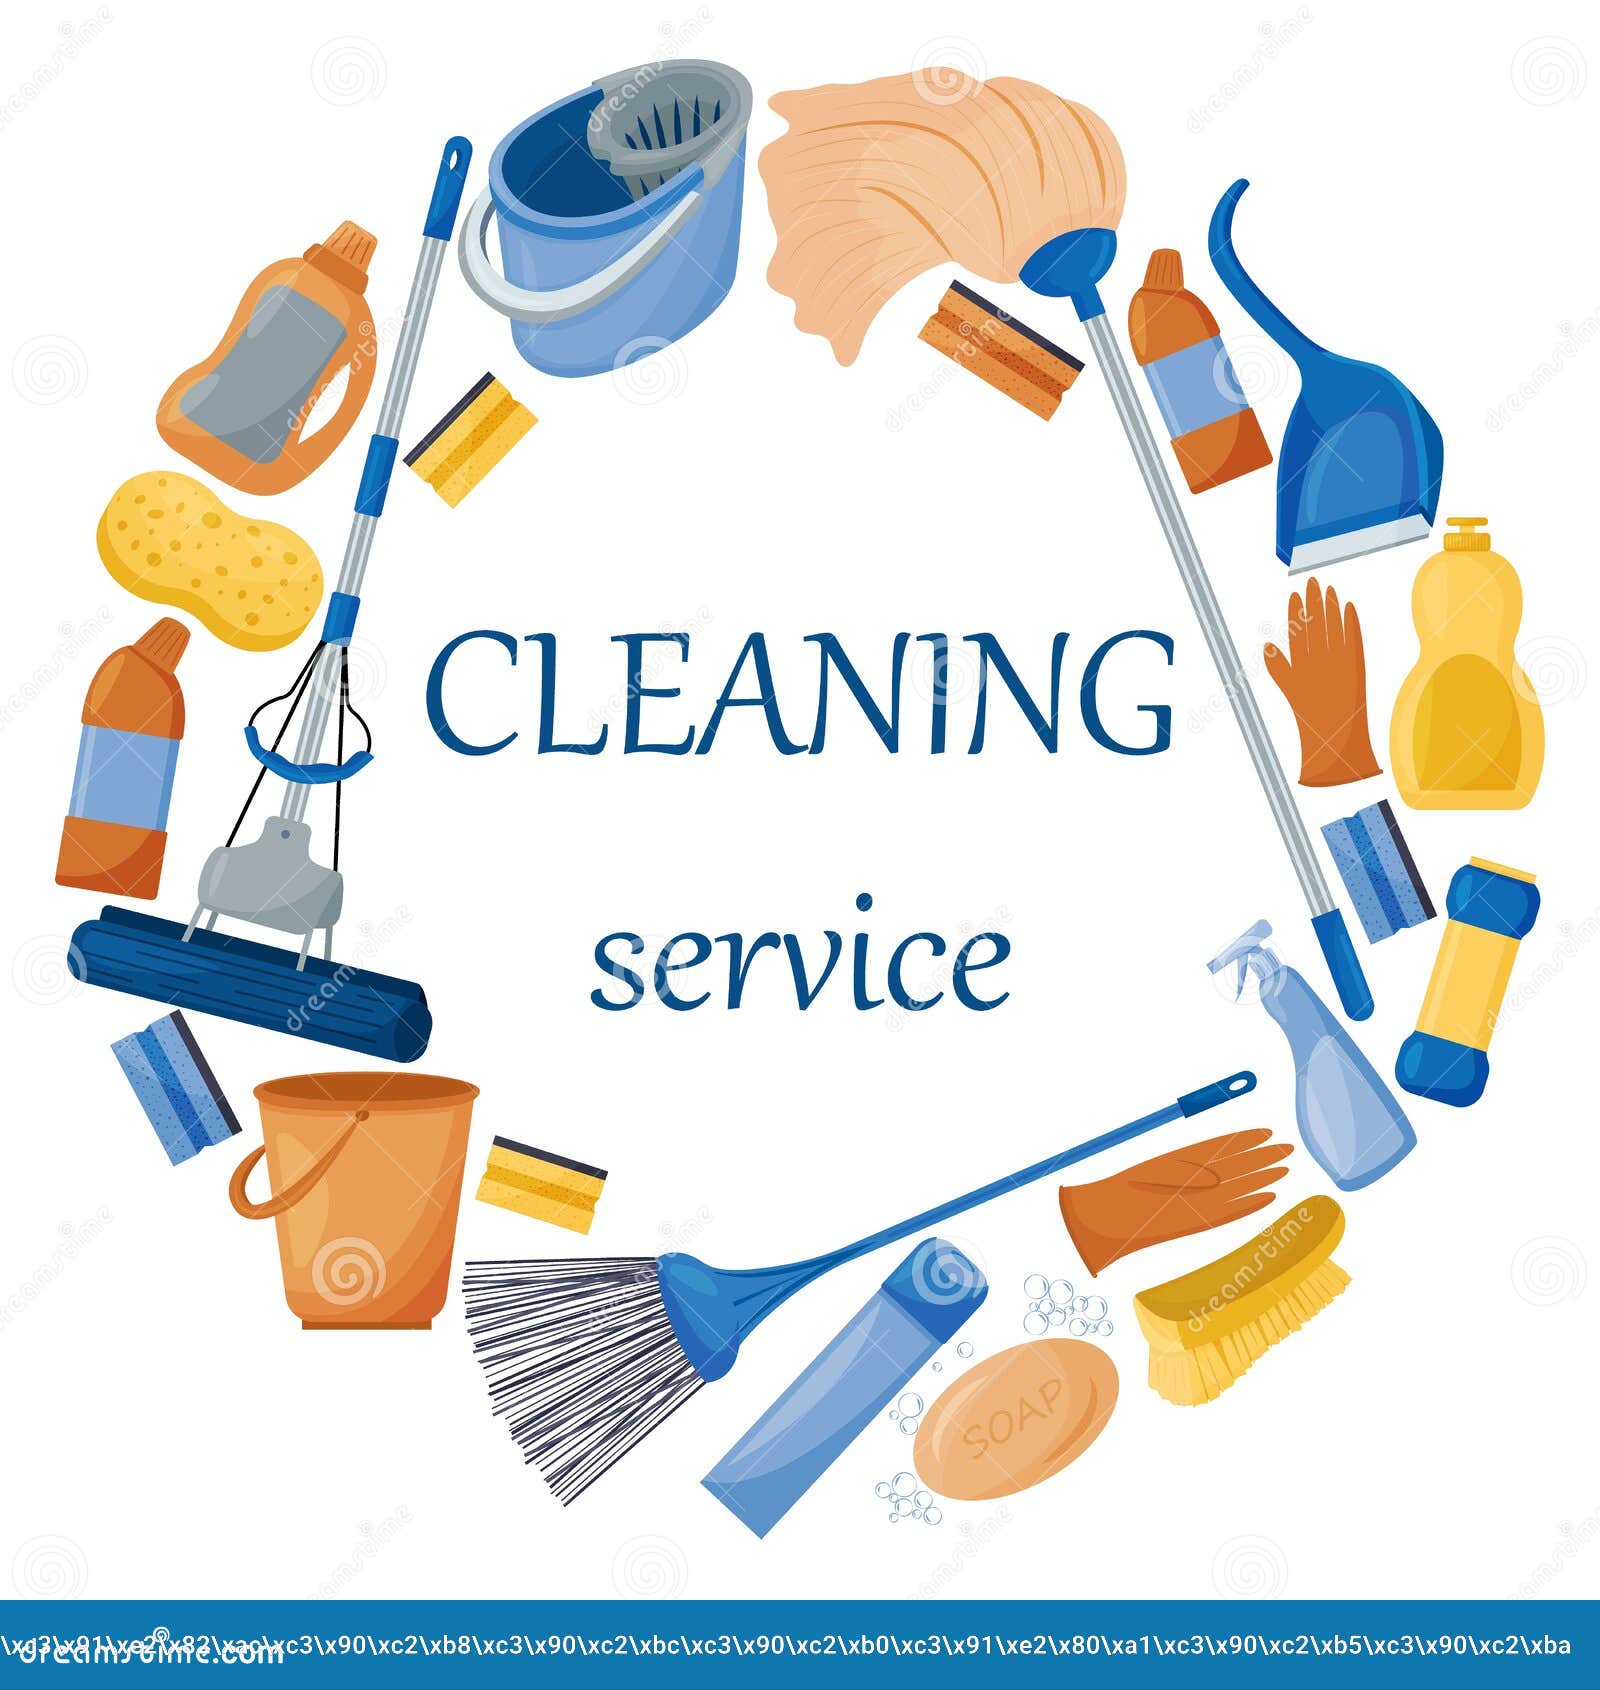 https://thumbs.dreamstime.com/z/cleaning-service-composition-set-tools-house-detergents-disinfectants-mop-bucket-brush-broom-vector-illustration-216725619.jpg